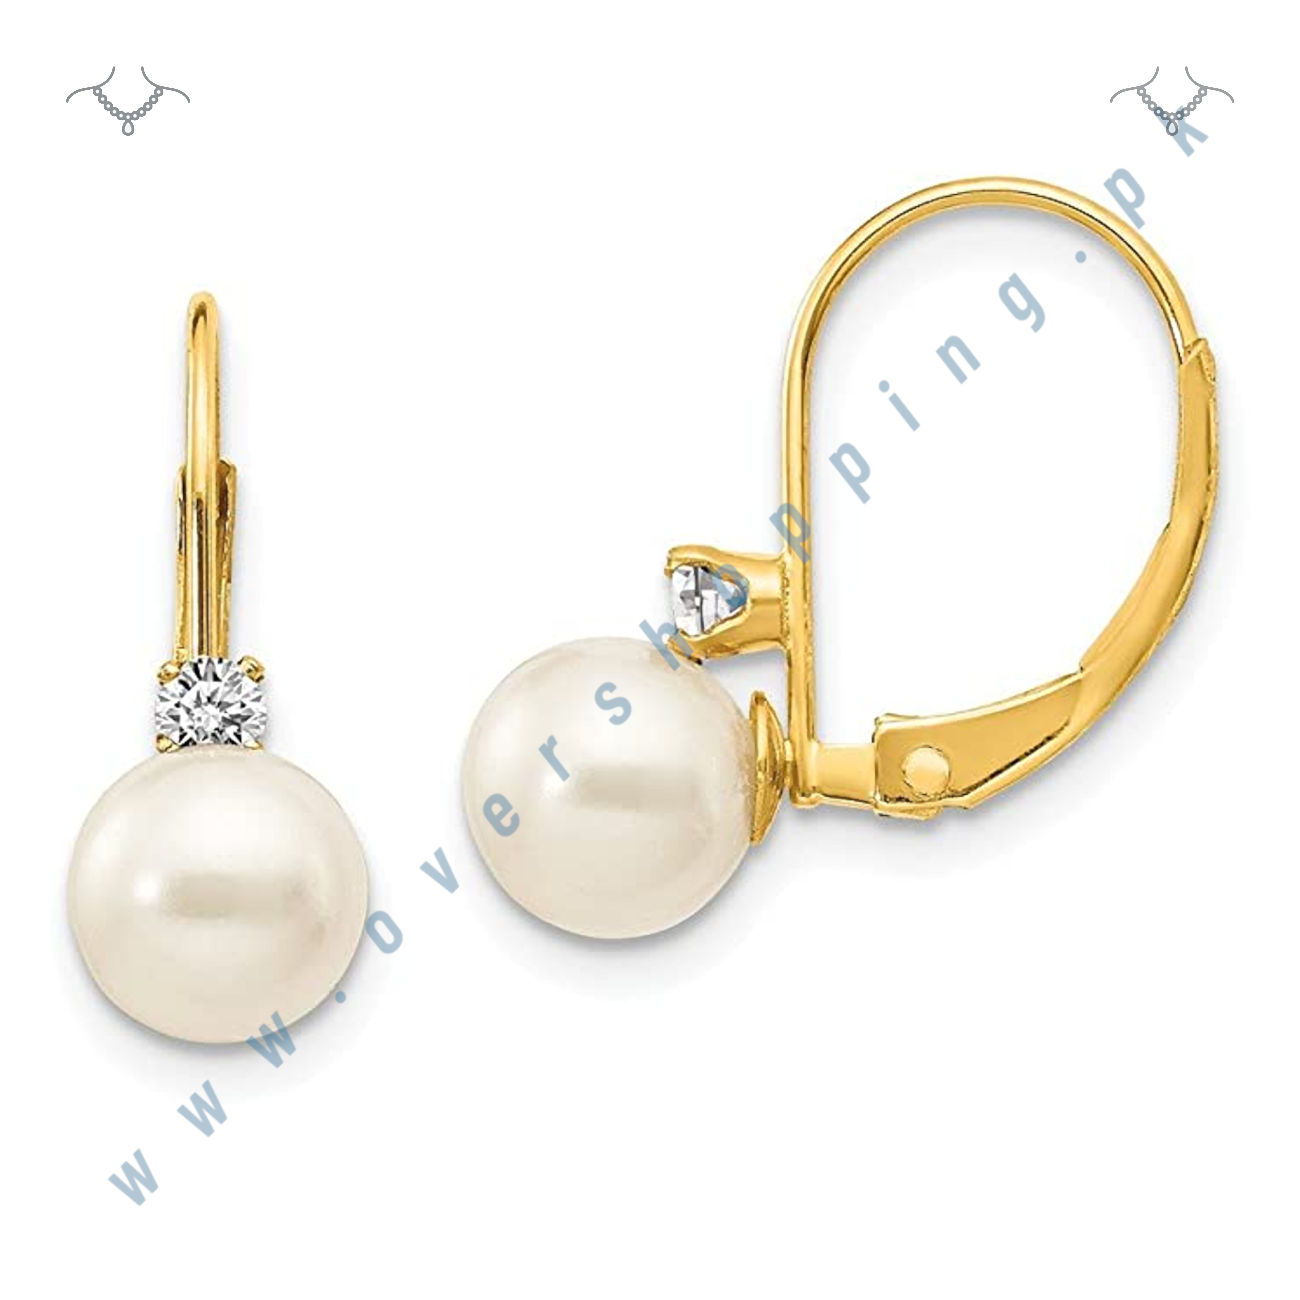 Elegant Solid 14k Yellow Gold Leverback Earrings with Freshwater Pearls and Diamonds by Sonia Jewels